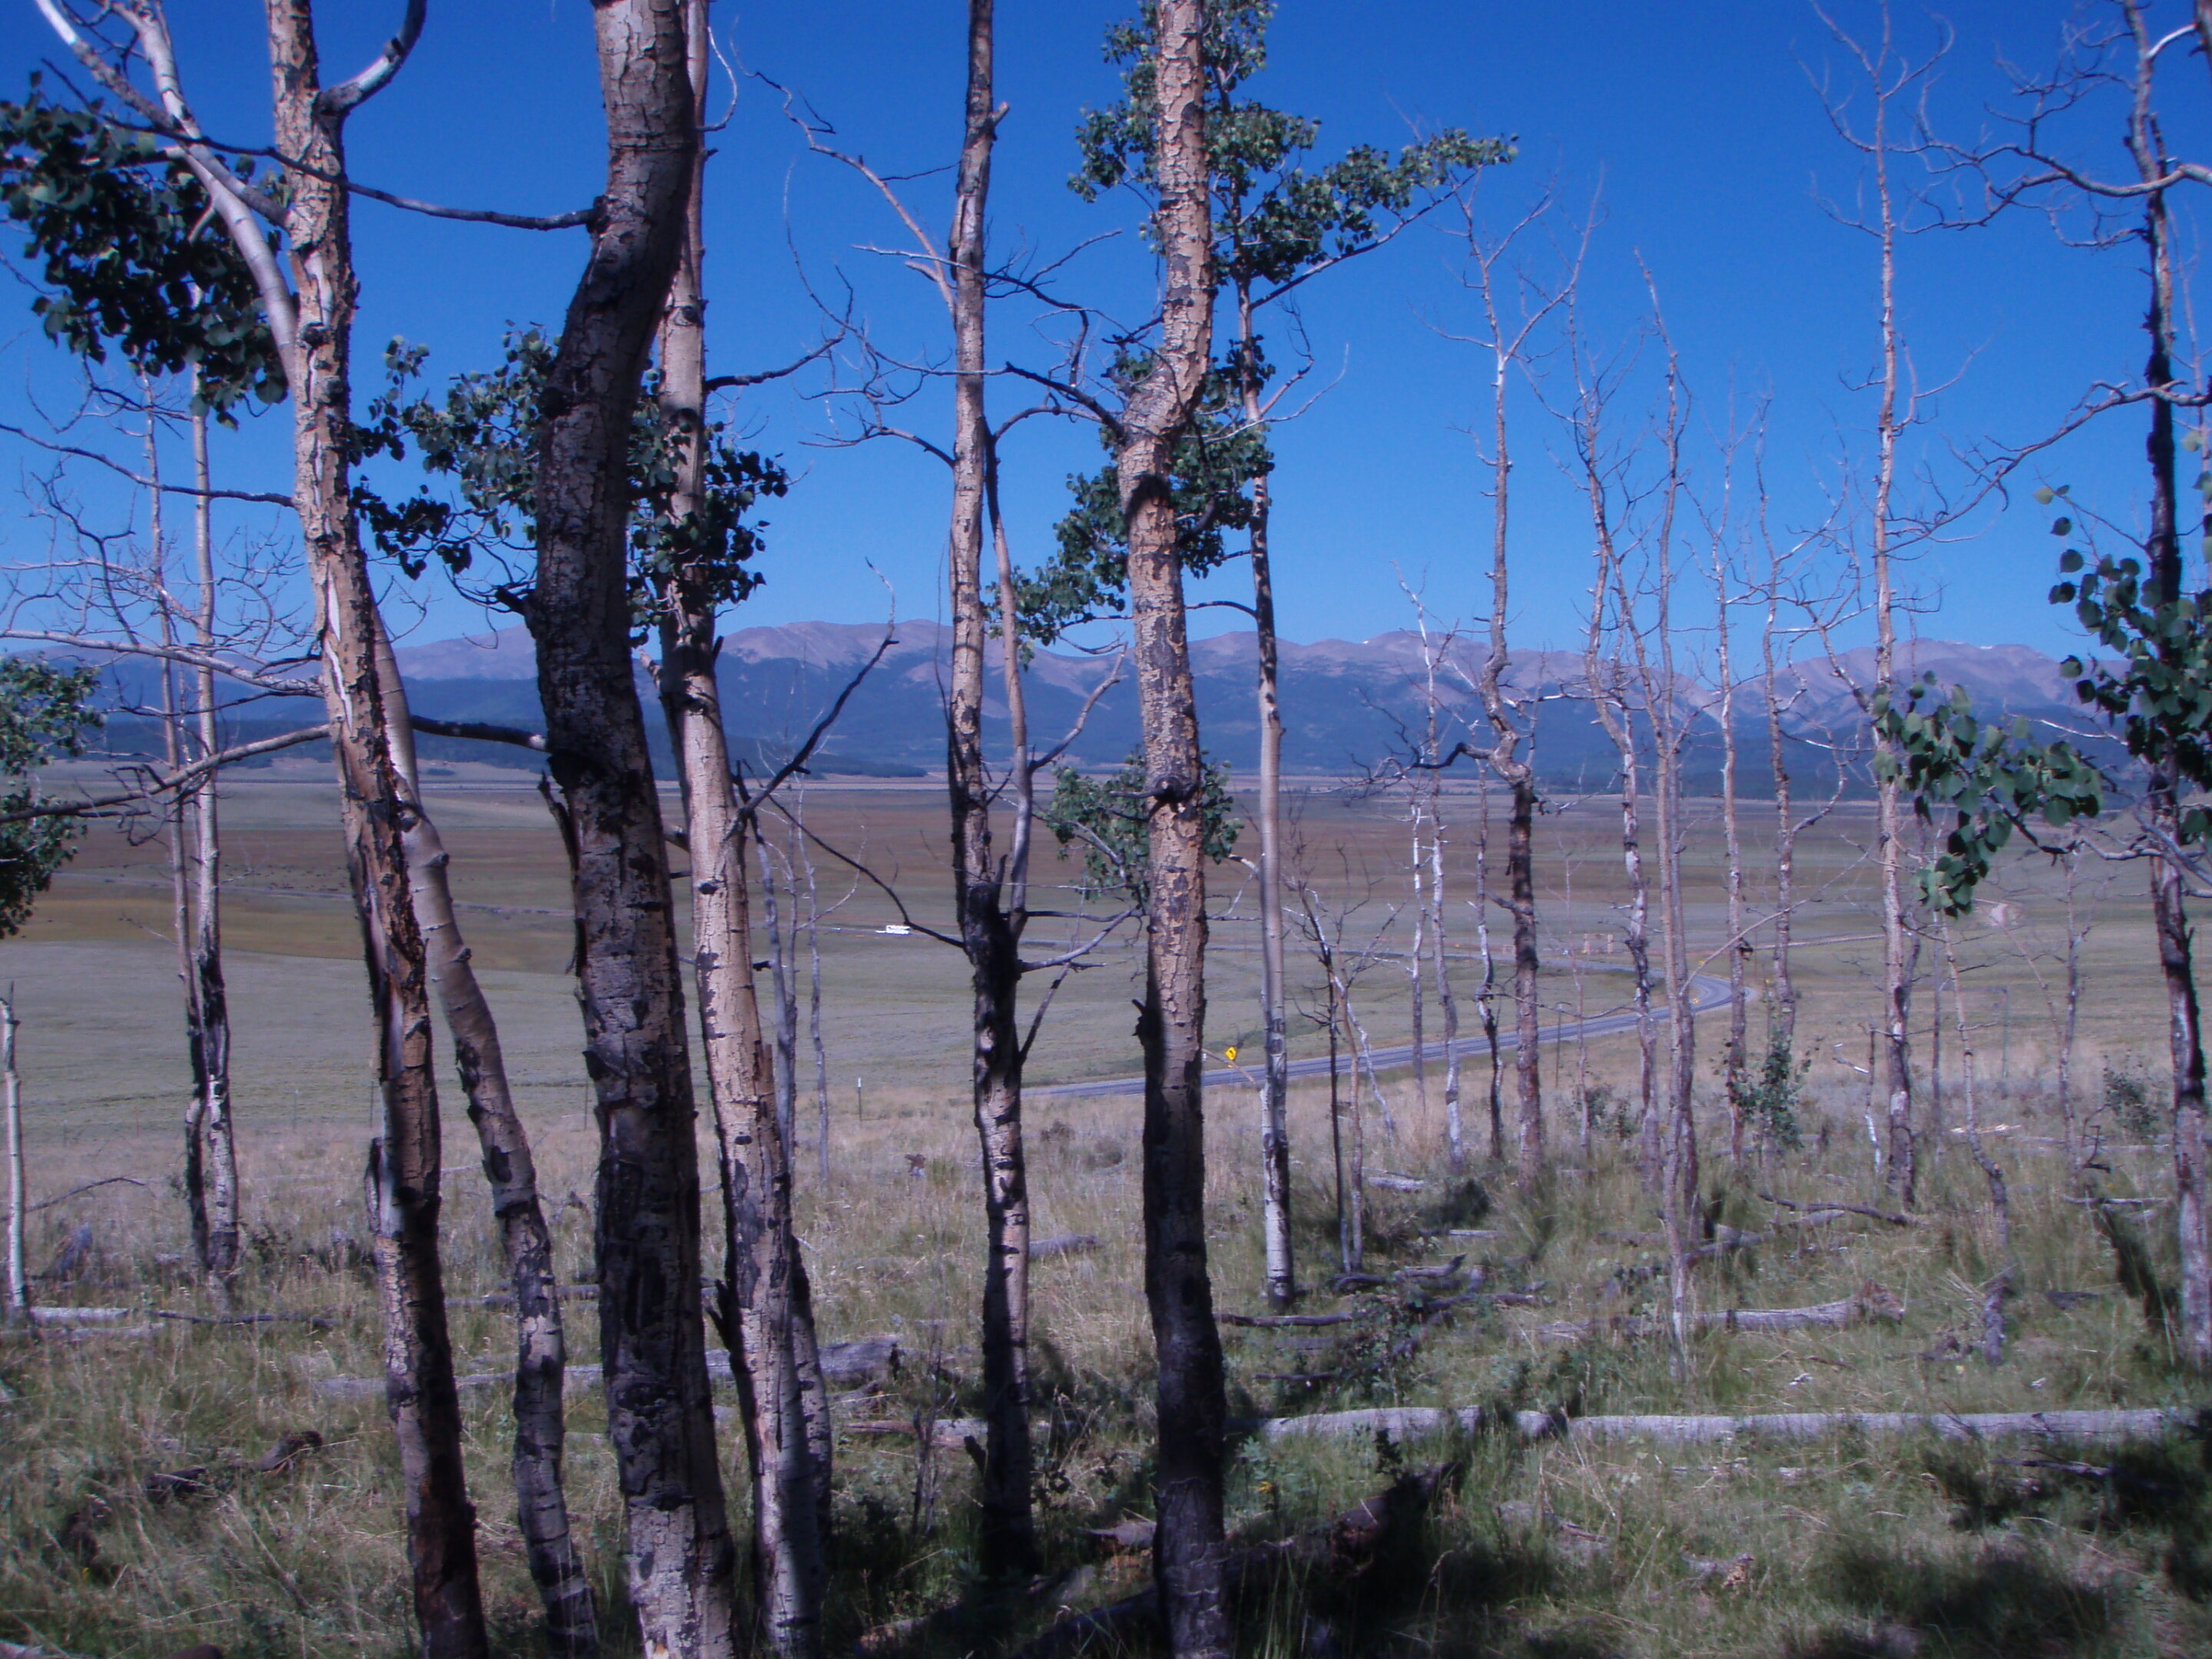 Climate change increases risks of tree death